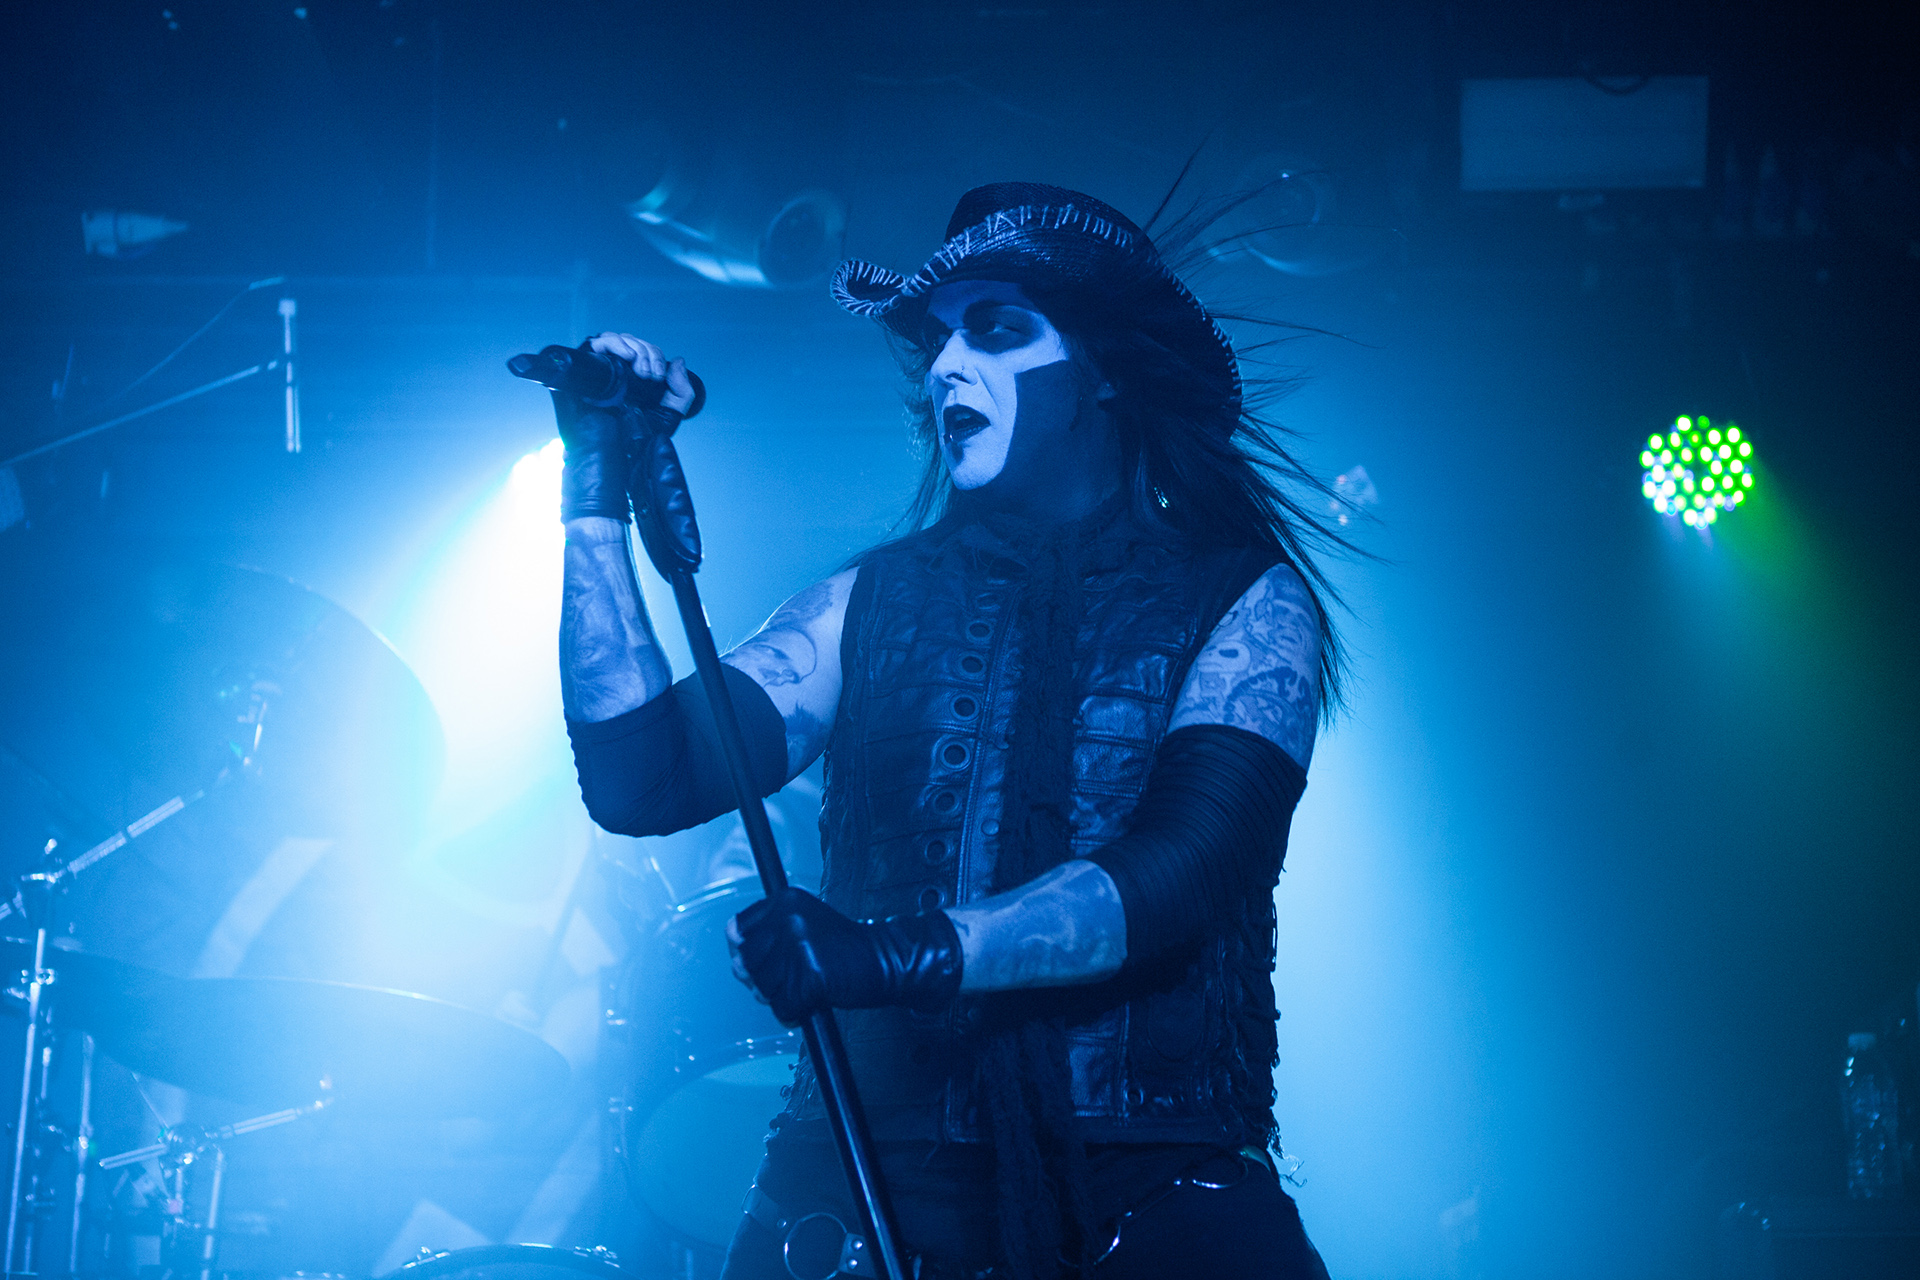 Wednesday 13 by Frank Ralph Photography